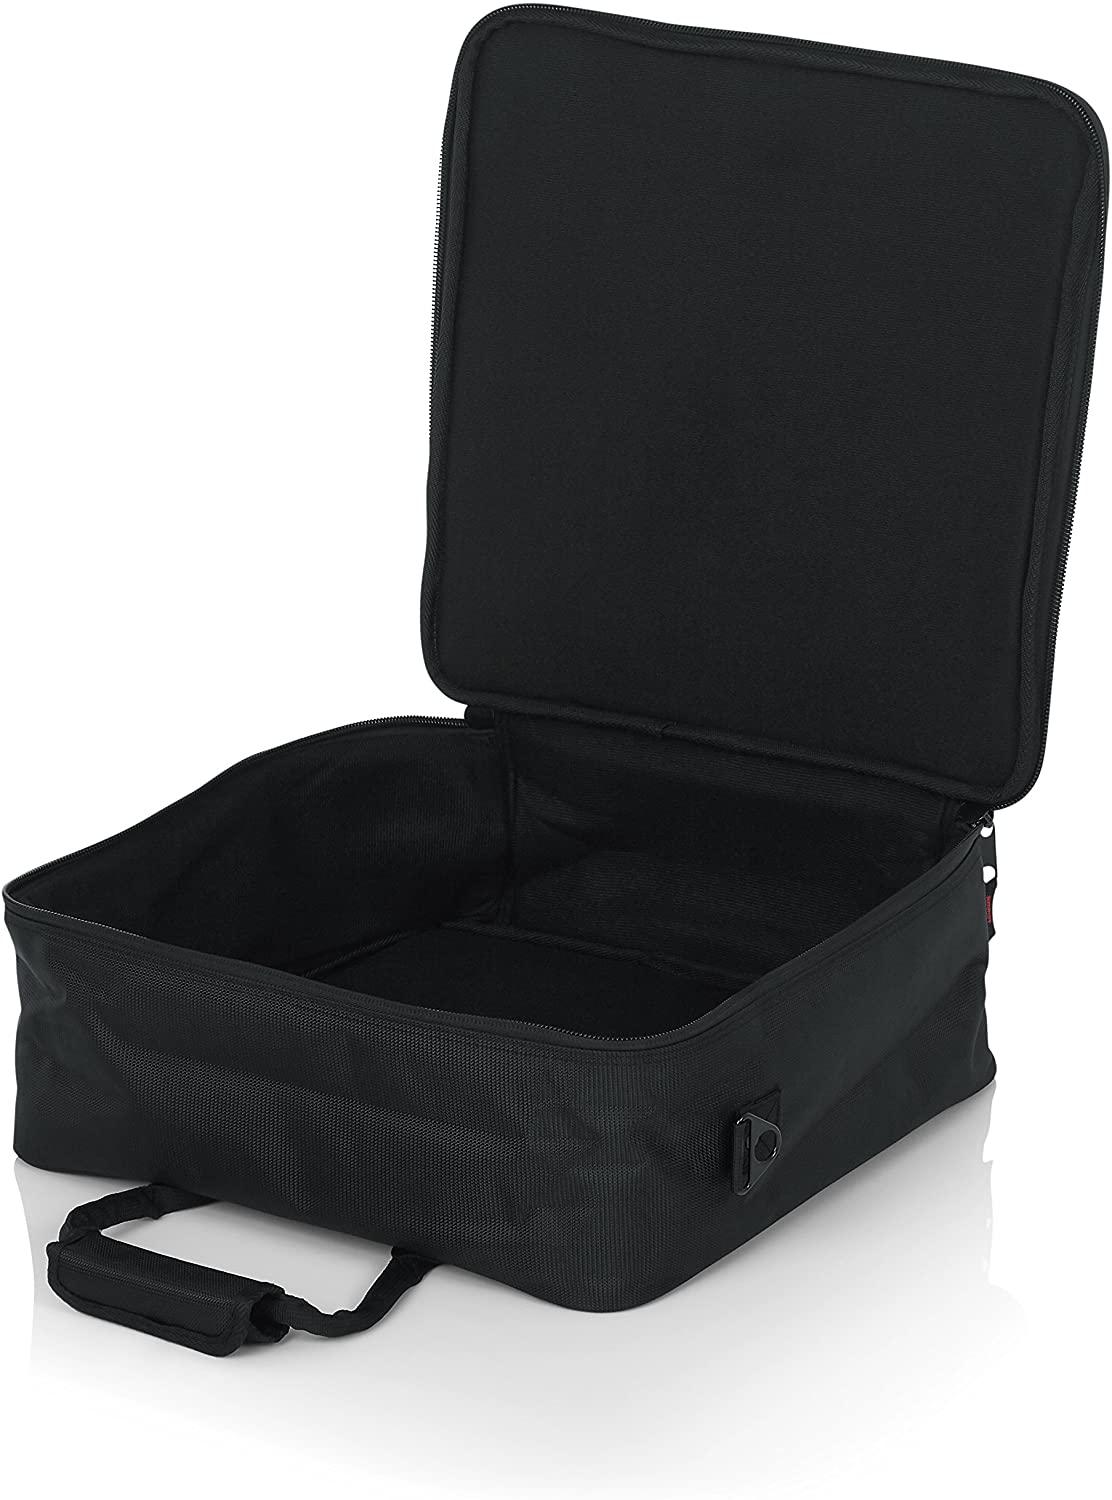 Gator Padded Mixer Case Equipment Gear Bag with Cord Management G-MIXERBAG-1515 - Pro-Distributing